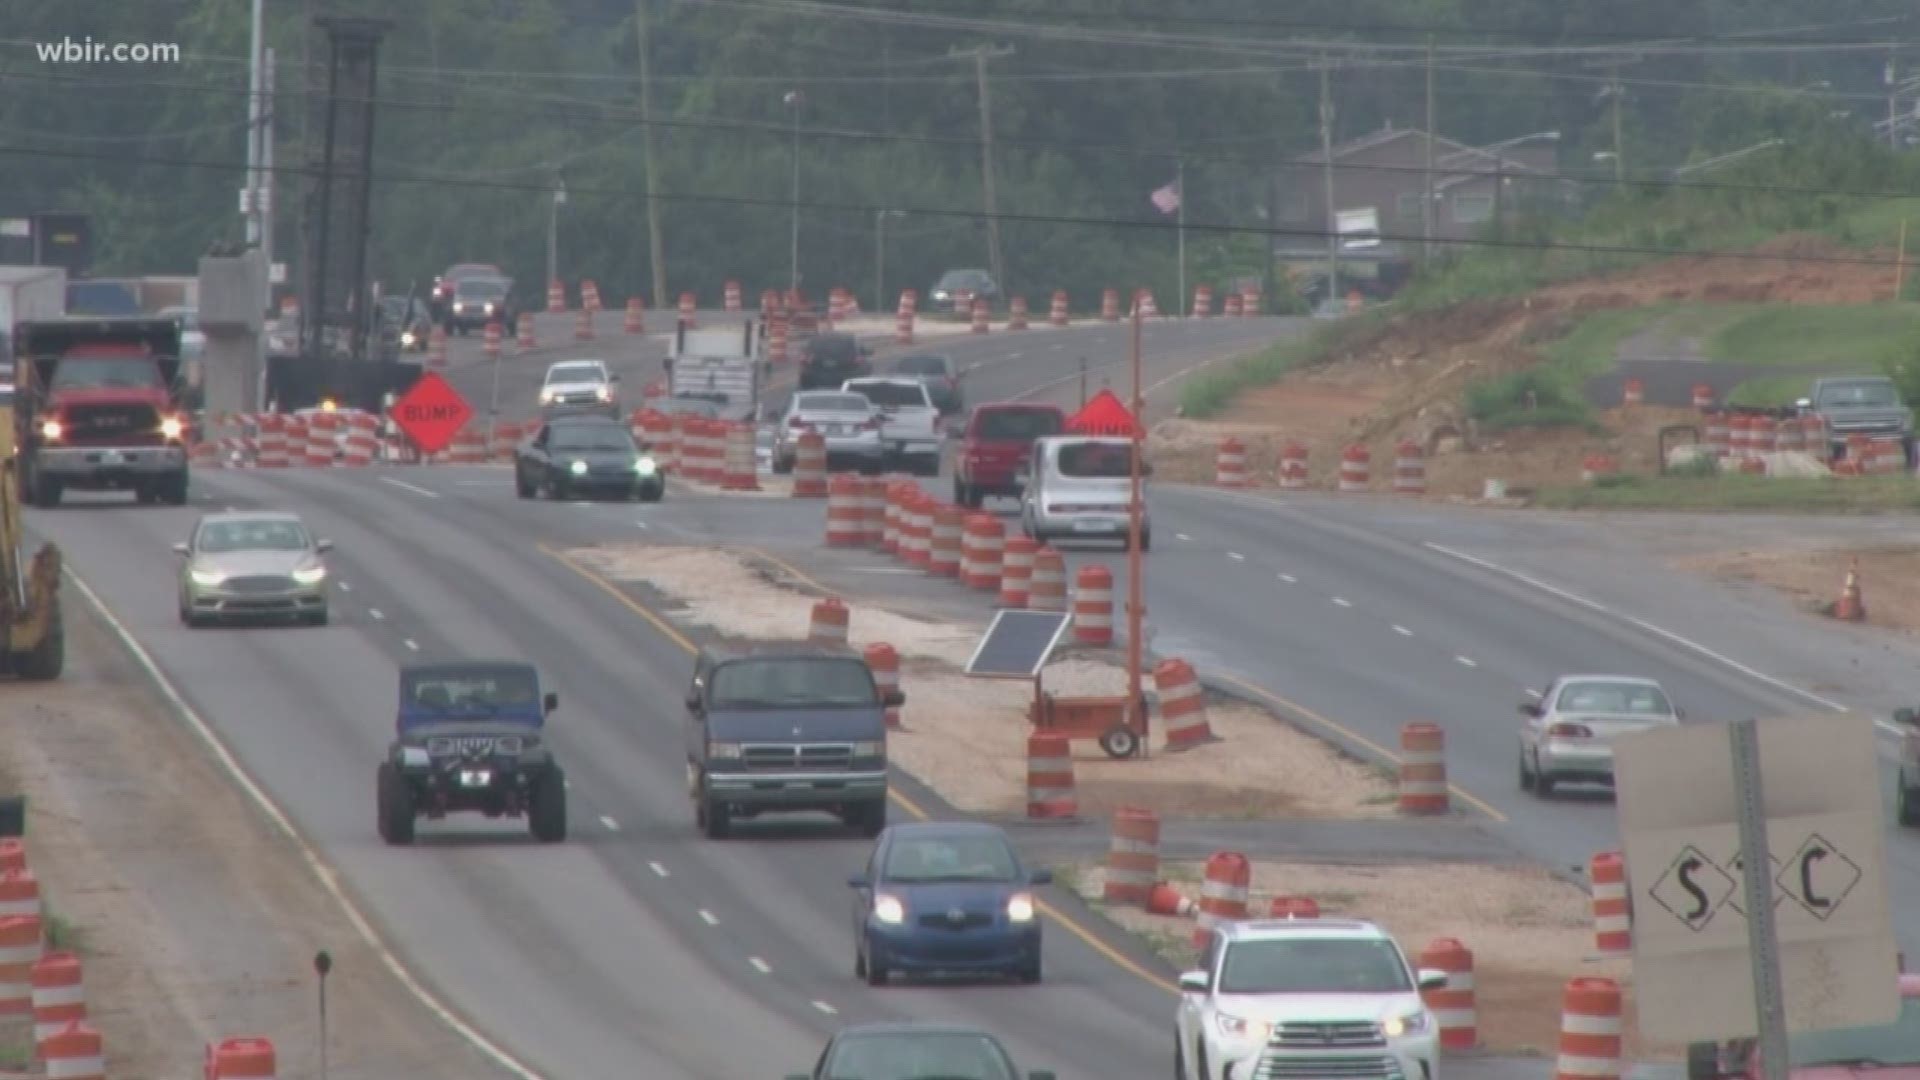 Viewer Terry Wheatley called our newsroom and asked "Why are cars speeding in the construction zone when the speed limit says 40 miles per hour? I'm afraid for the workers out there."